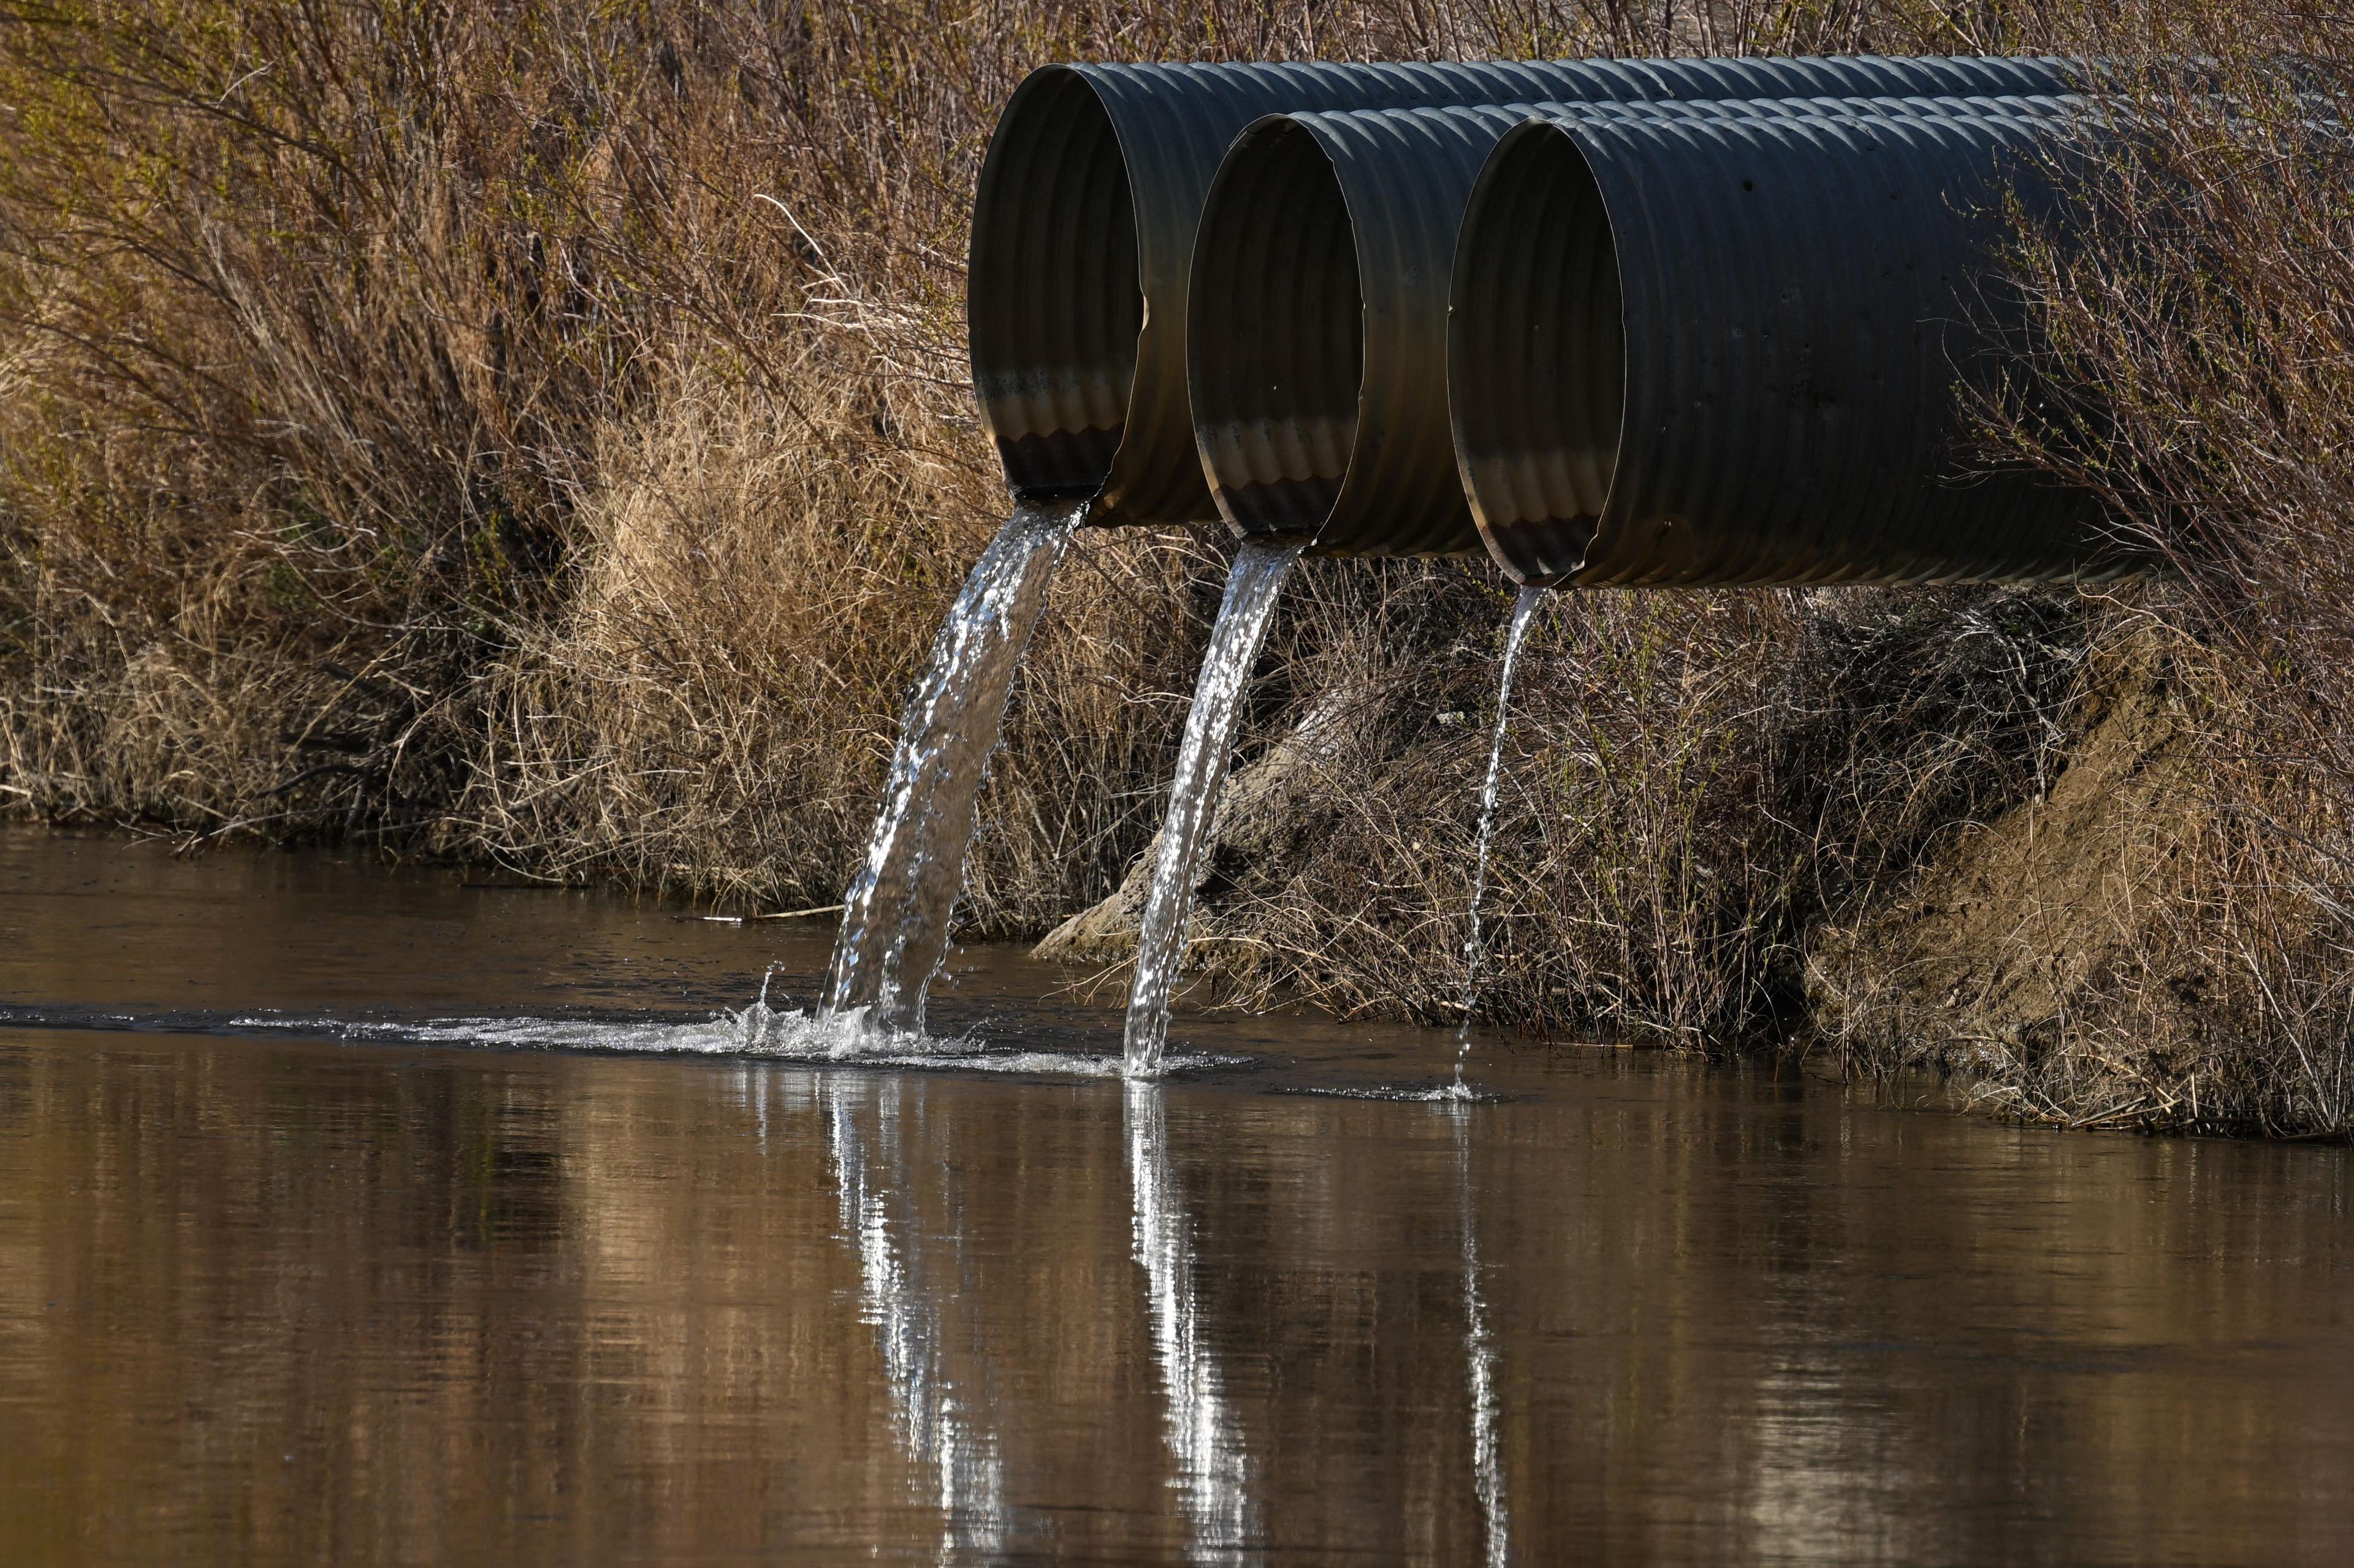 California One Step Closer to Developing Delta Water Tunnel Project